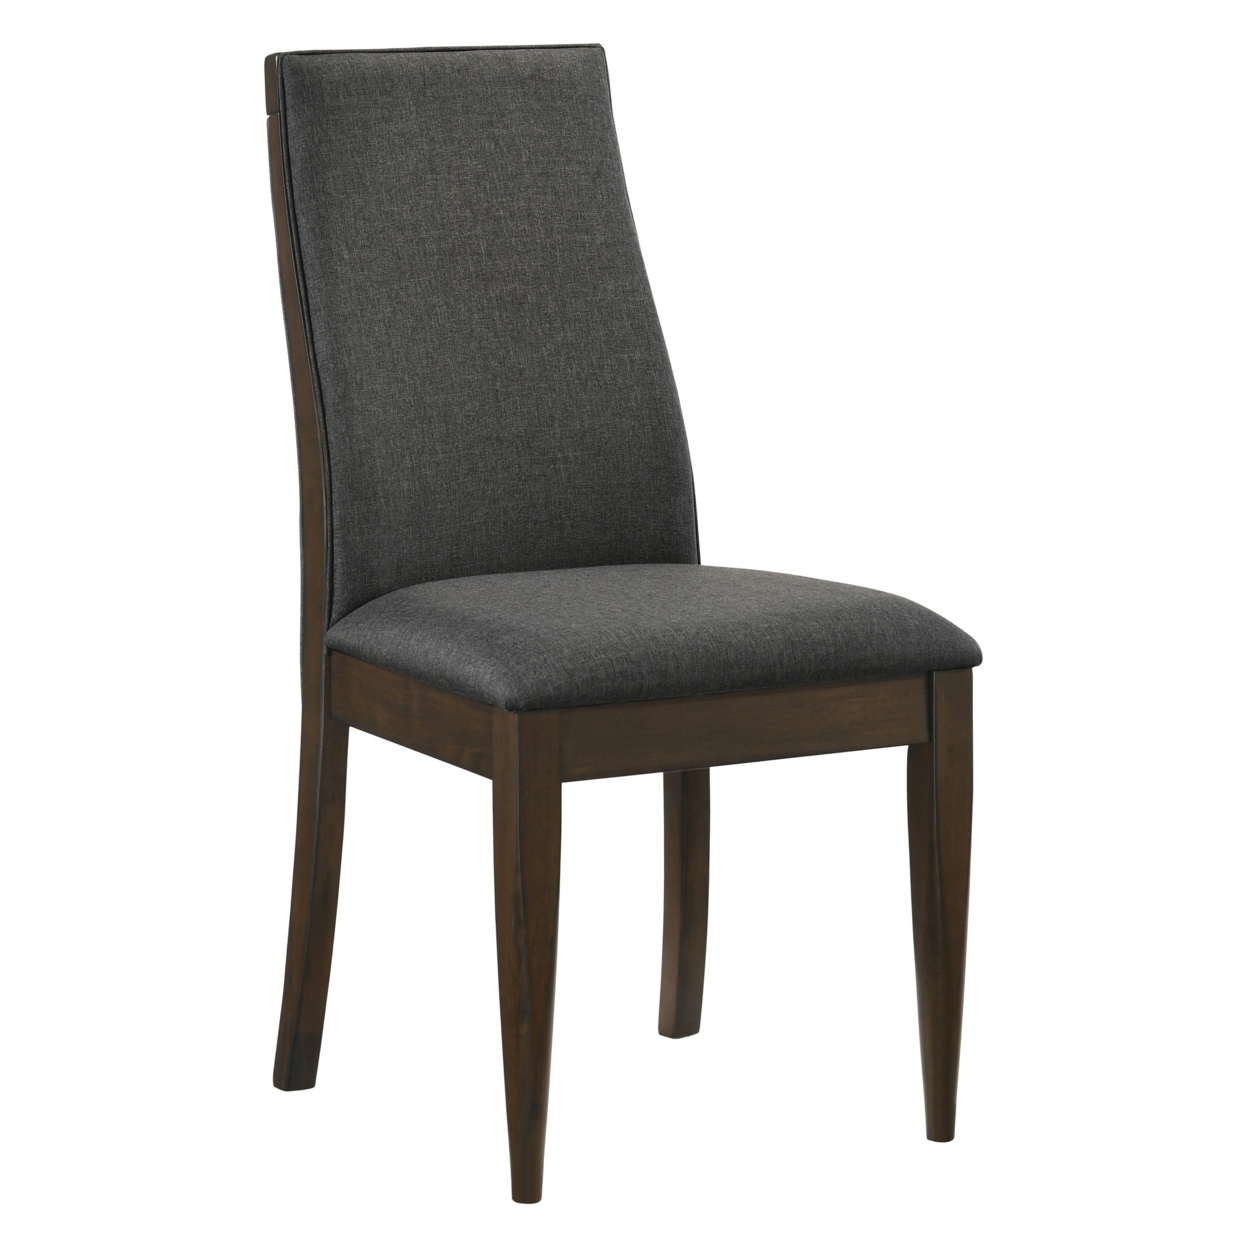 19 Inch Side Chairs, Set Of 2, Gray Fabric, Tall Sloped Back, Parson Style- Saltoro Sherpi